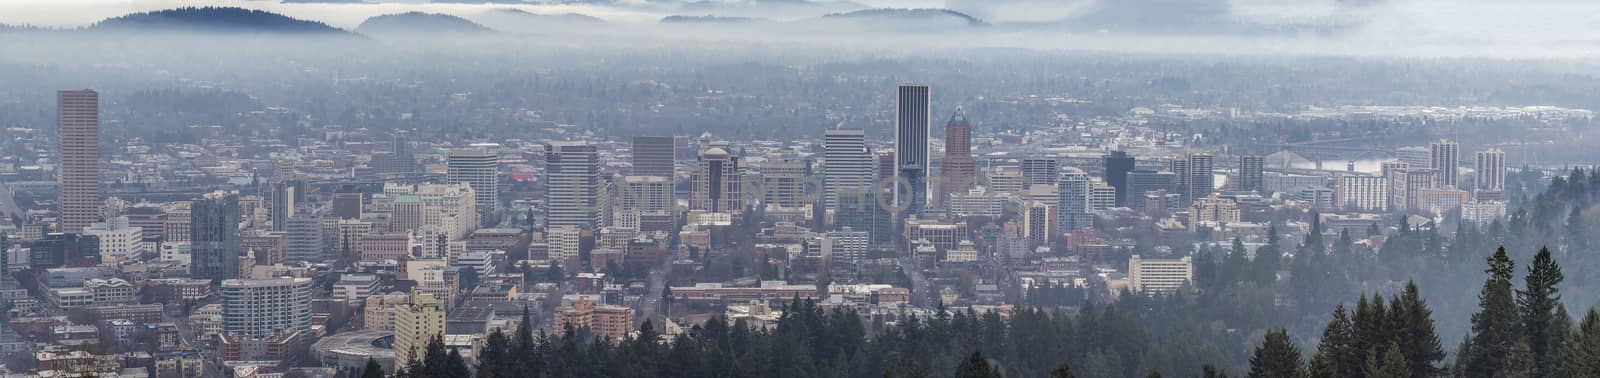 Foggy Portland Downtown Cityscape Panorama by Davidgn